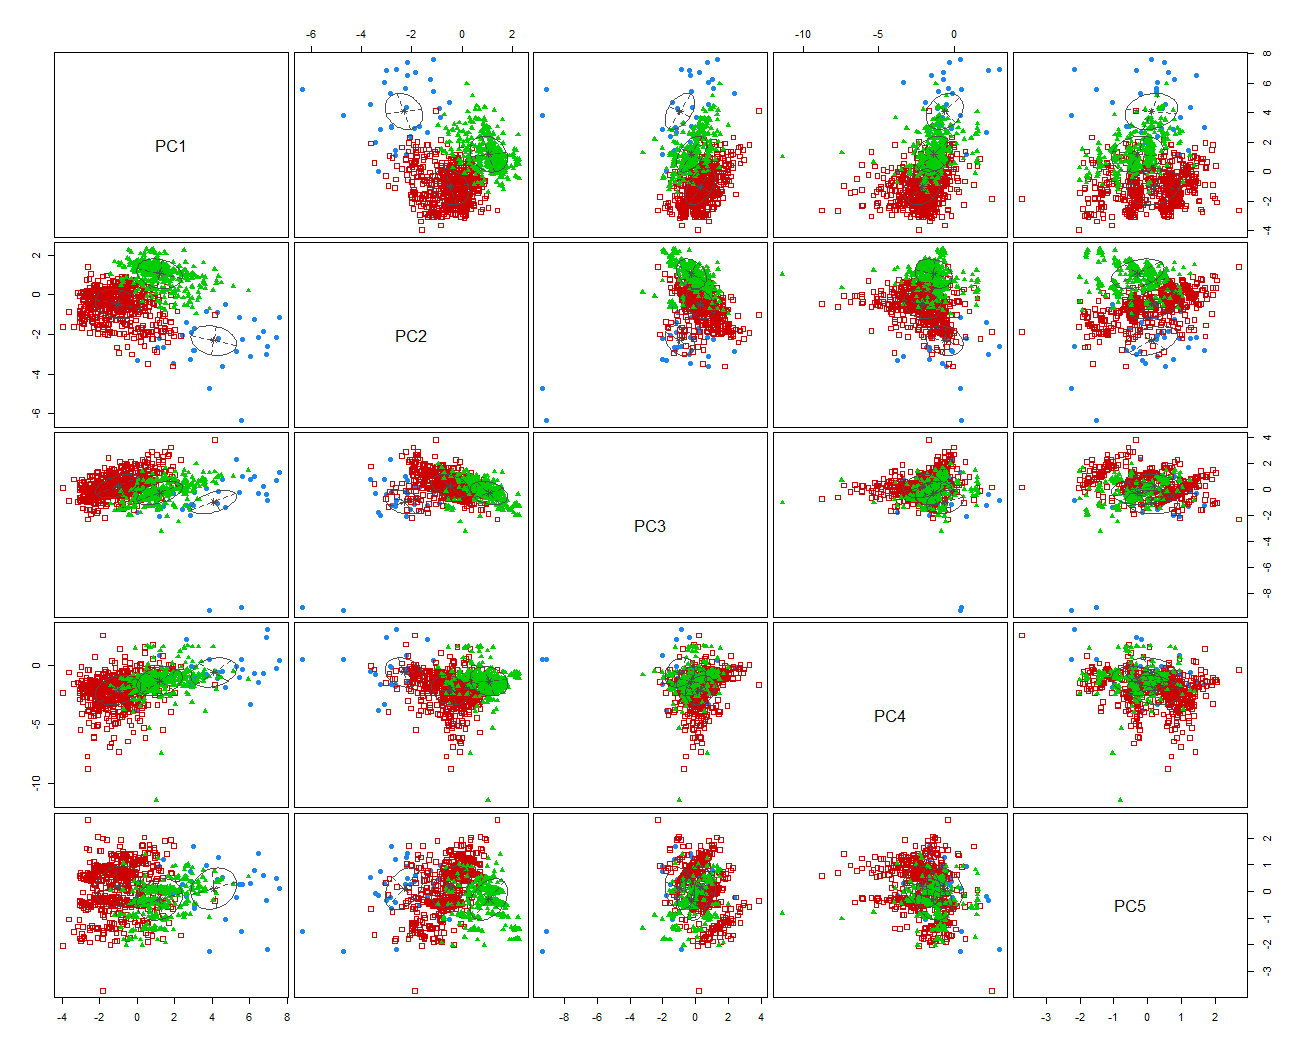 Bivariate plots of the PCA coordinate values with outliers removed.